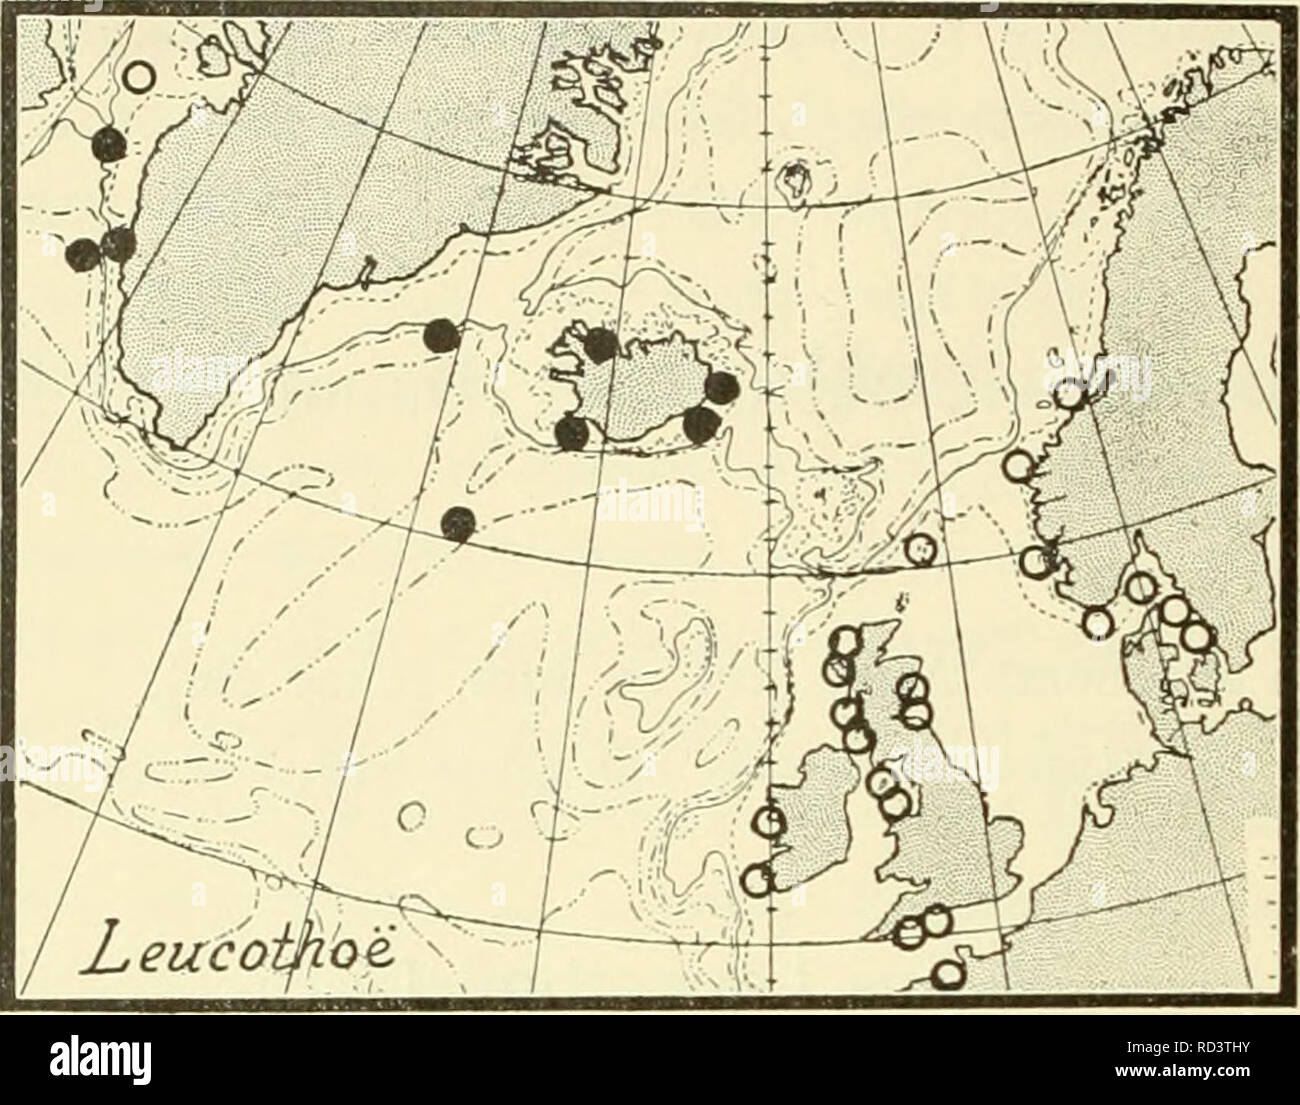 . The Danish Ingolf-expedition. Marine animals -- Arctic regions; Scientific expeditions; Arctic regions. 178 CRUSTACEA MALACOSTRACA. VI.. Chart 31. Leucothoe spinicarpa (north Atlantic localities). • loca- lities for the first time mentioned in the present paper. O loca- lities from the literature. and Barnard (1. c. 1916) are right in their lists of synonyms, the species has a much wider distribution and seems to be cosmopolitan, found even in the Antarctic area (for special localities see Chilton 1. c. and Barnard 1. a). Posterior to Barnard's paper of 1916 the following localities have app Stock Photo